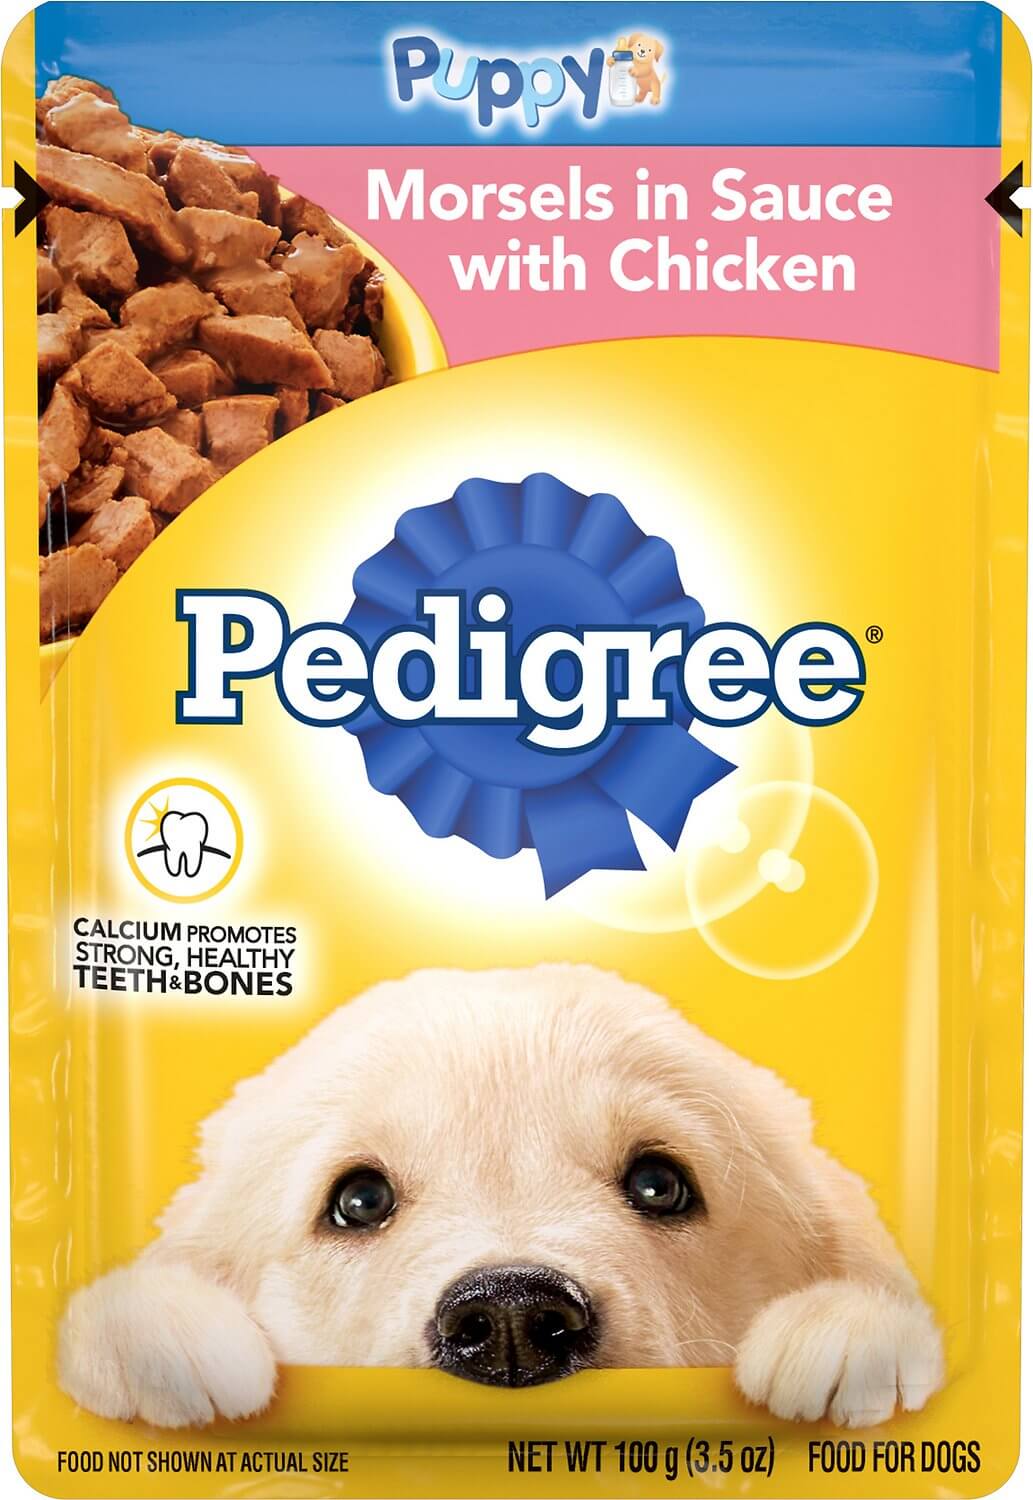 Pedigree Choice Cuts Puppy Morsels with Chicken Wet Dog Food